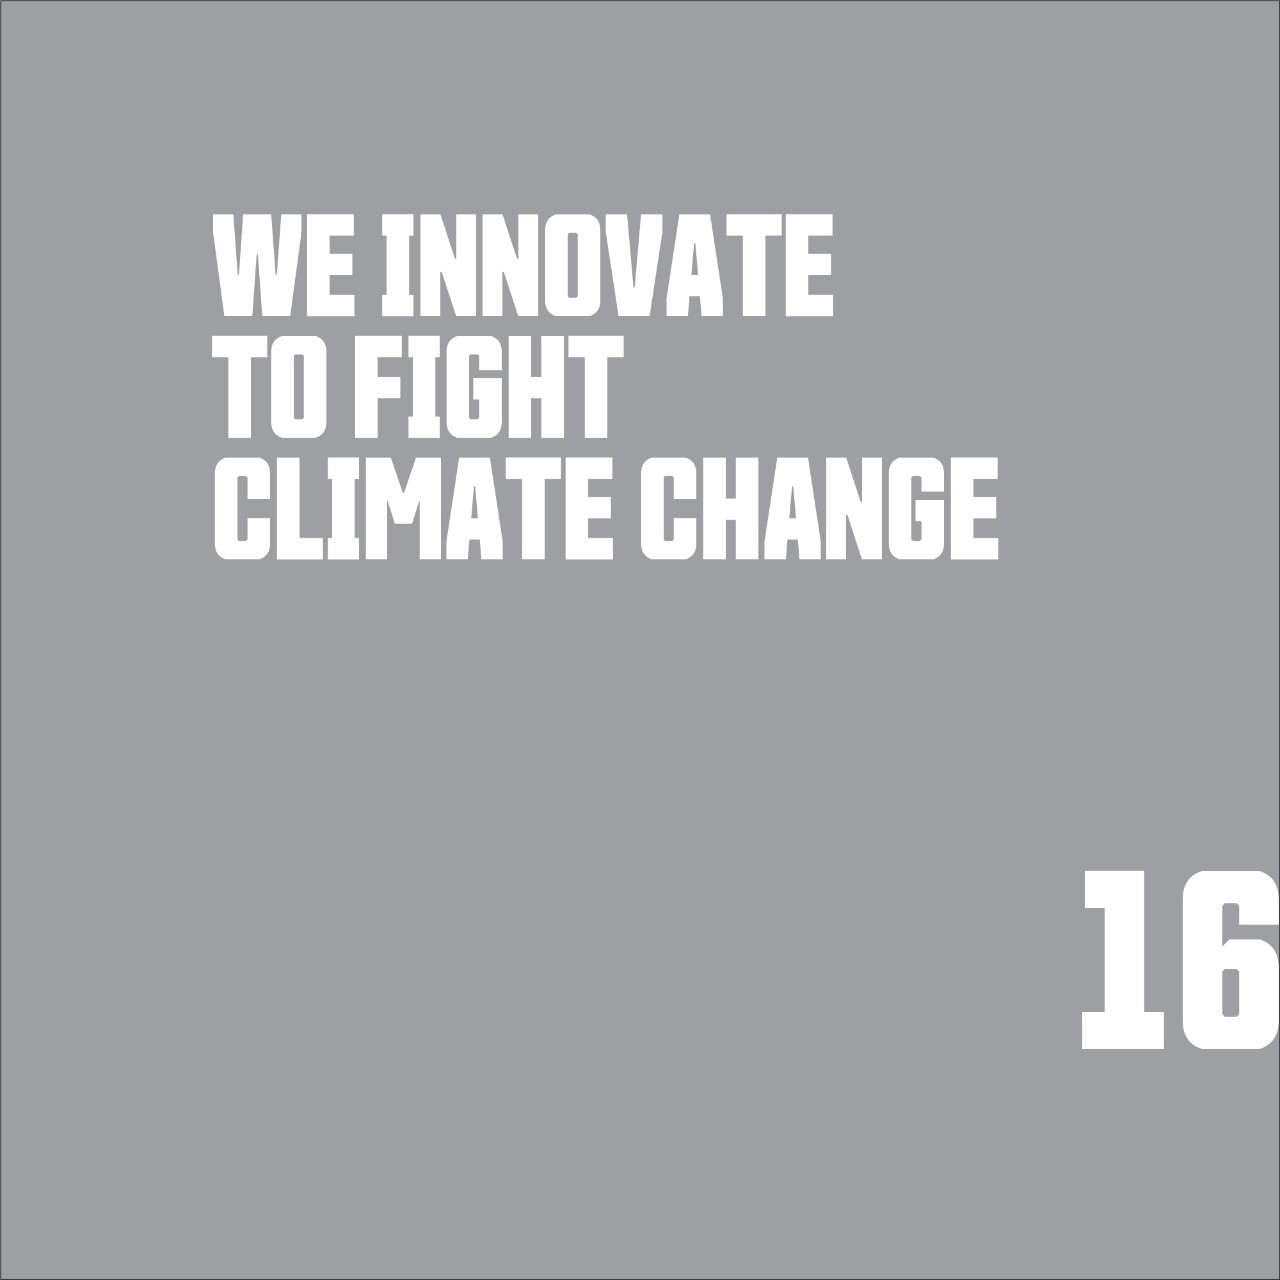 We Innovate to Fight Climate Change